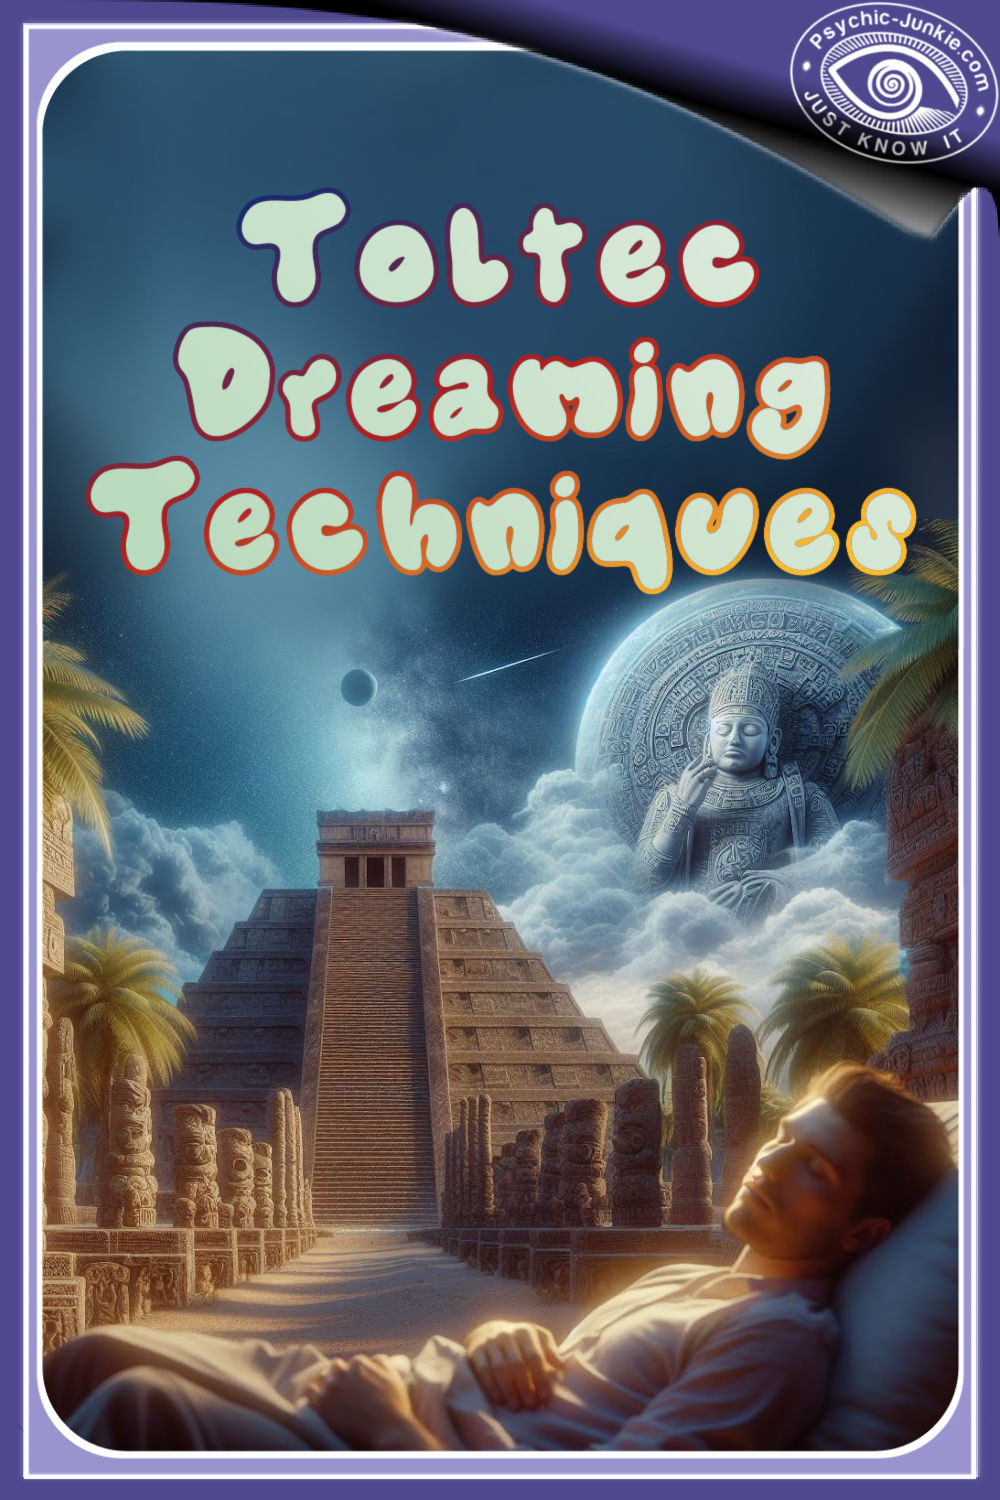 Learn Toltec Dreaming Practices with Sergio Magaña